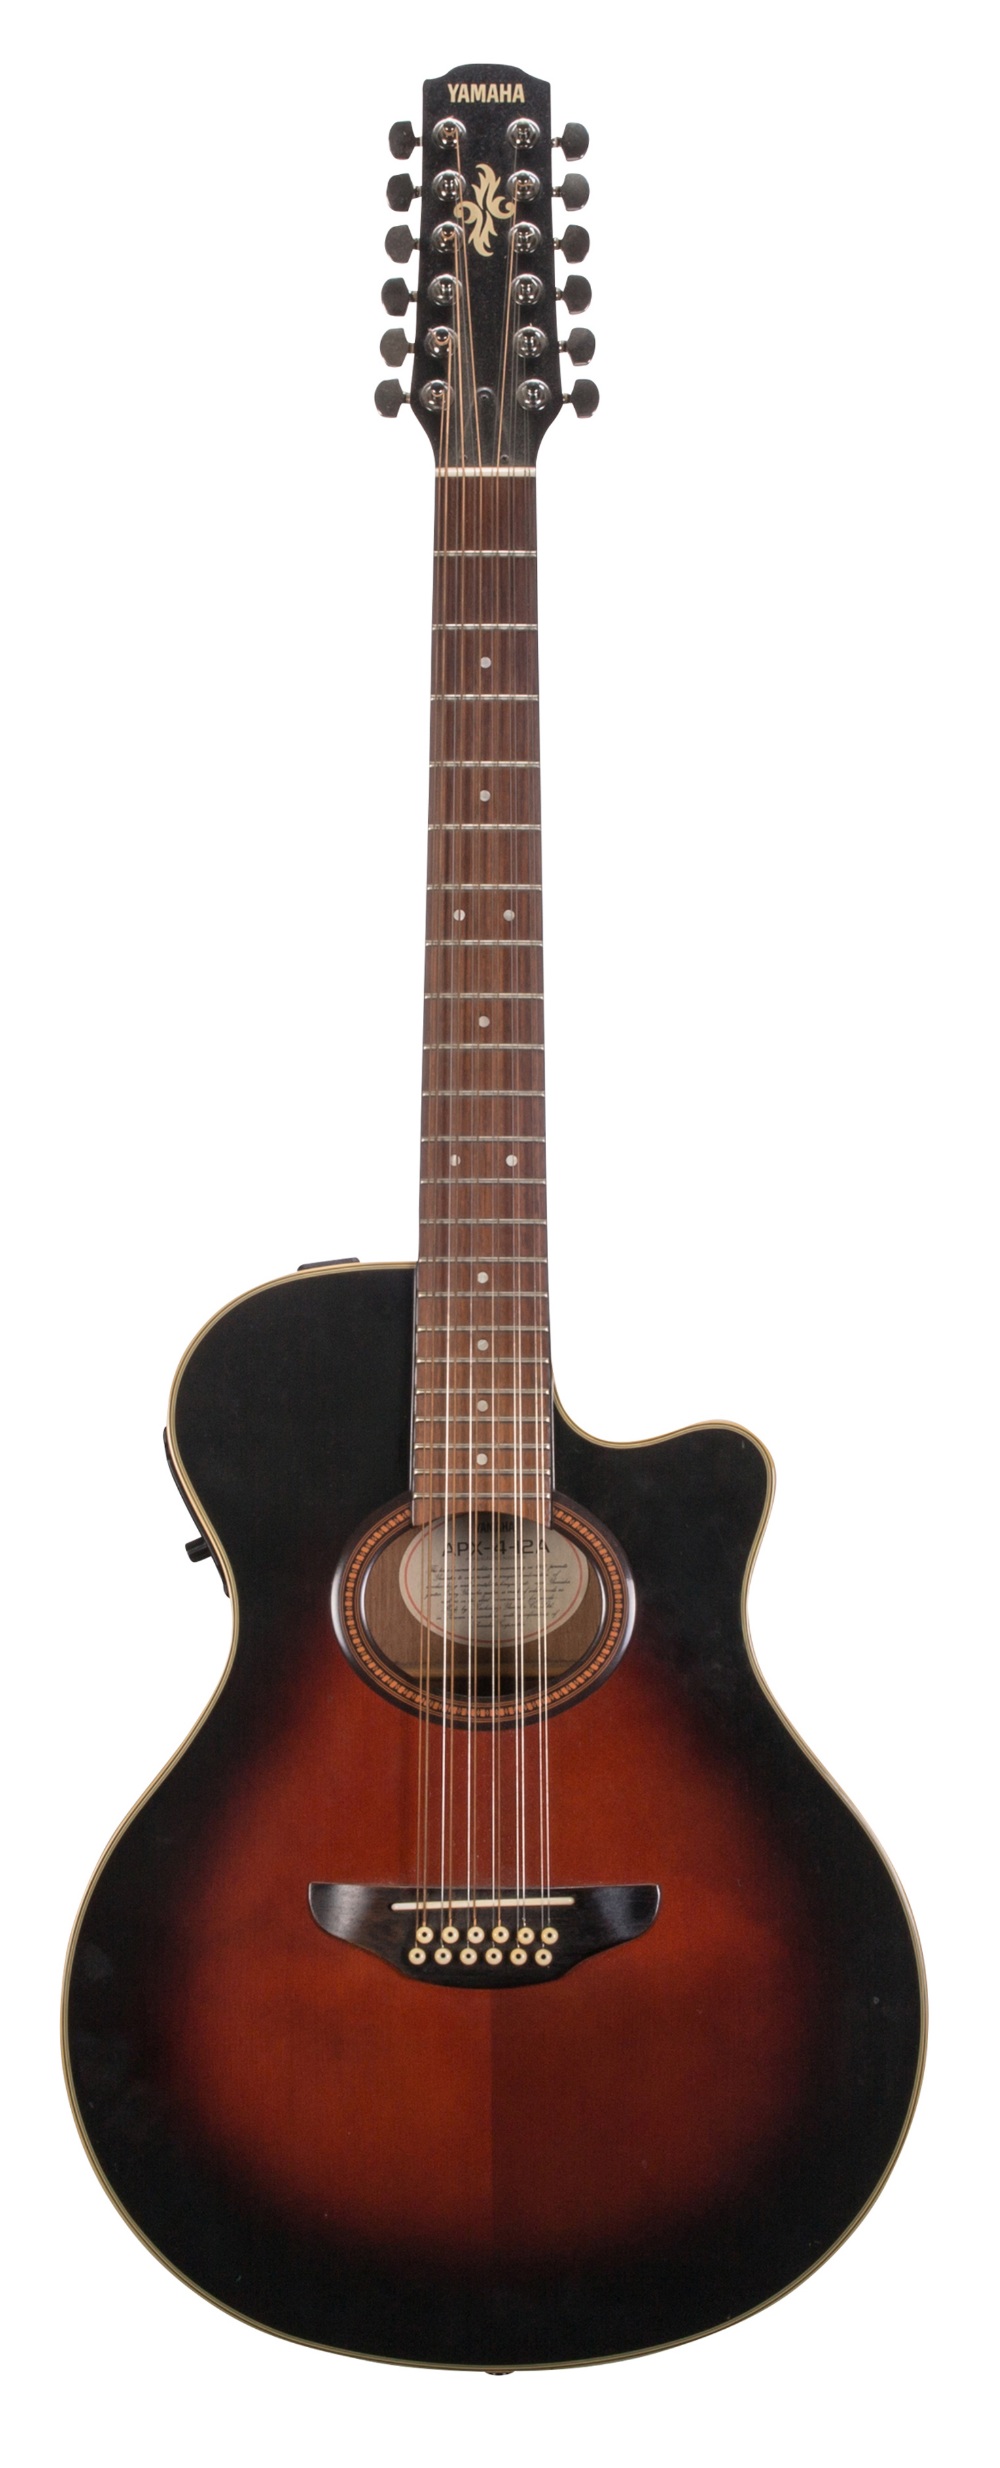 Yamaha APX-4-12A twelve string electro-acoustic guitar, made in Taiwan, ser. no. 6xxxxx9; Finish: